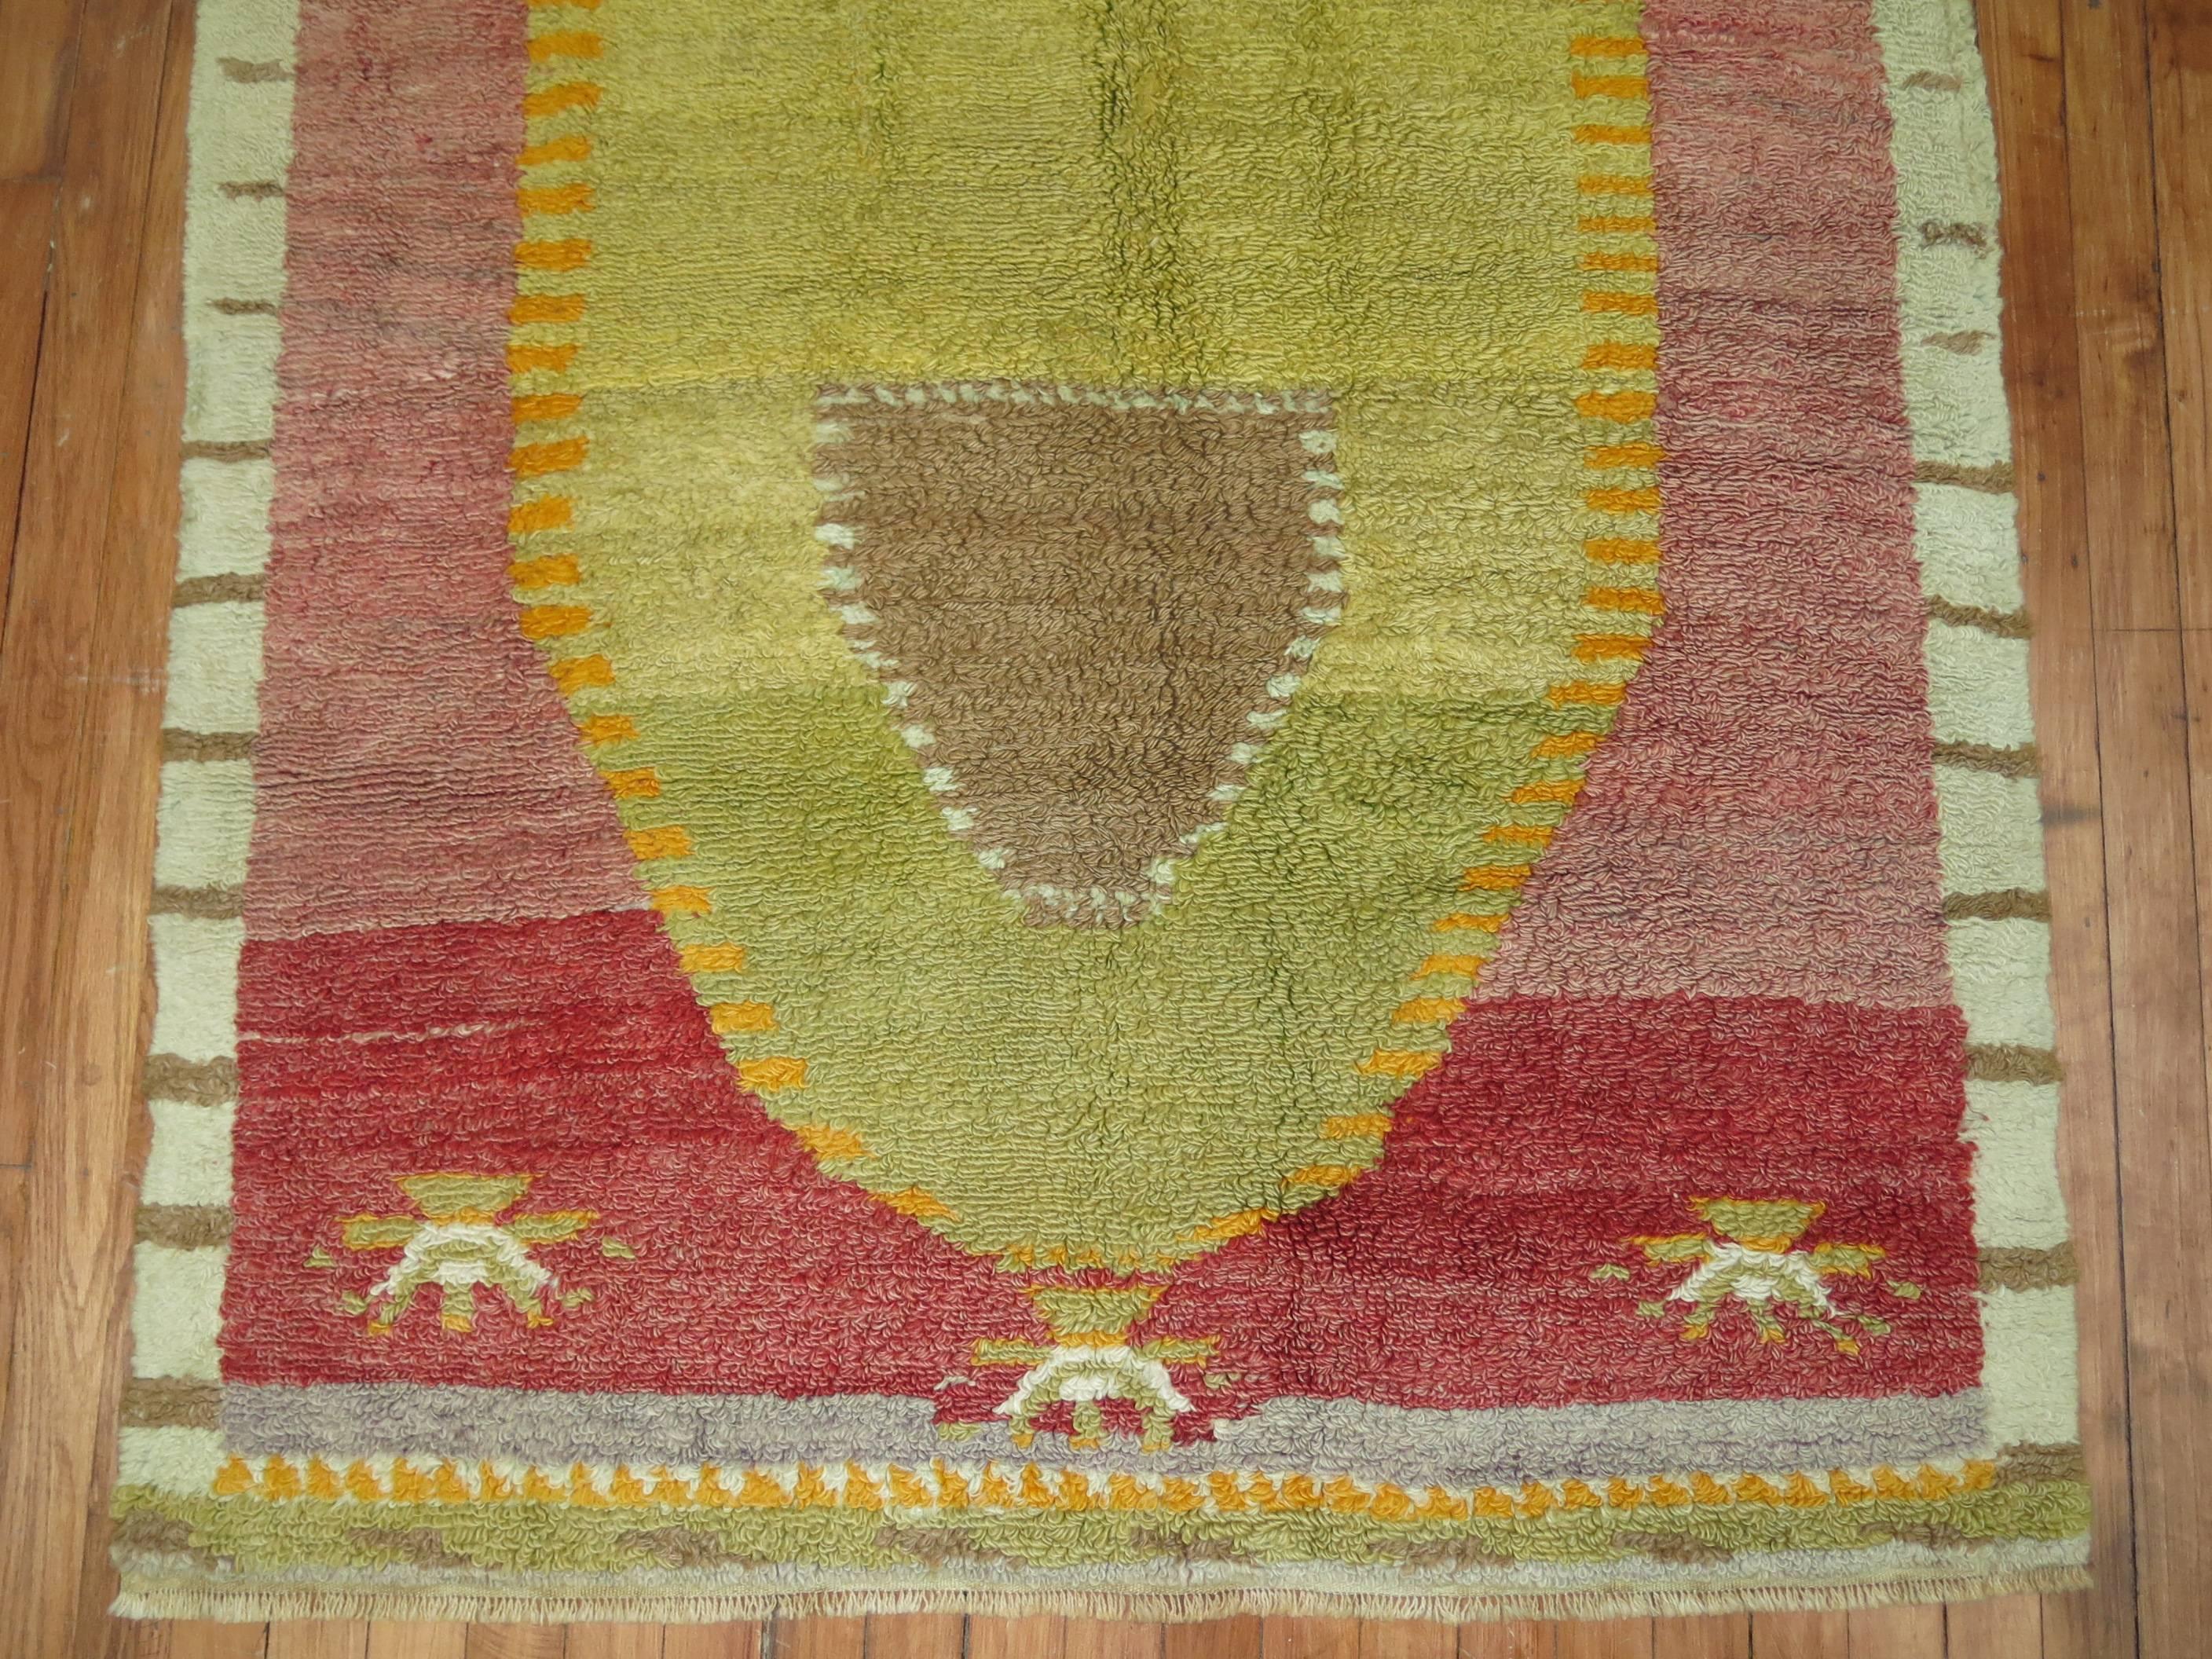 Turkish Tulu rug with an interesting green medallion on a soft red colored ground.